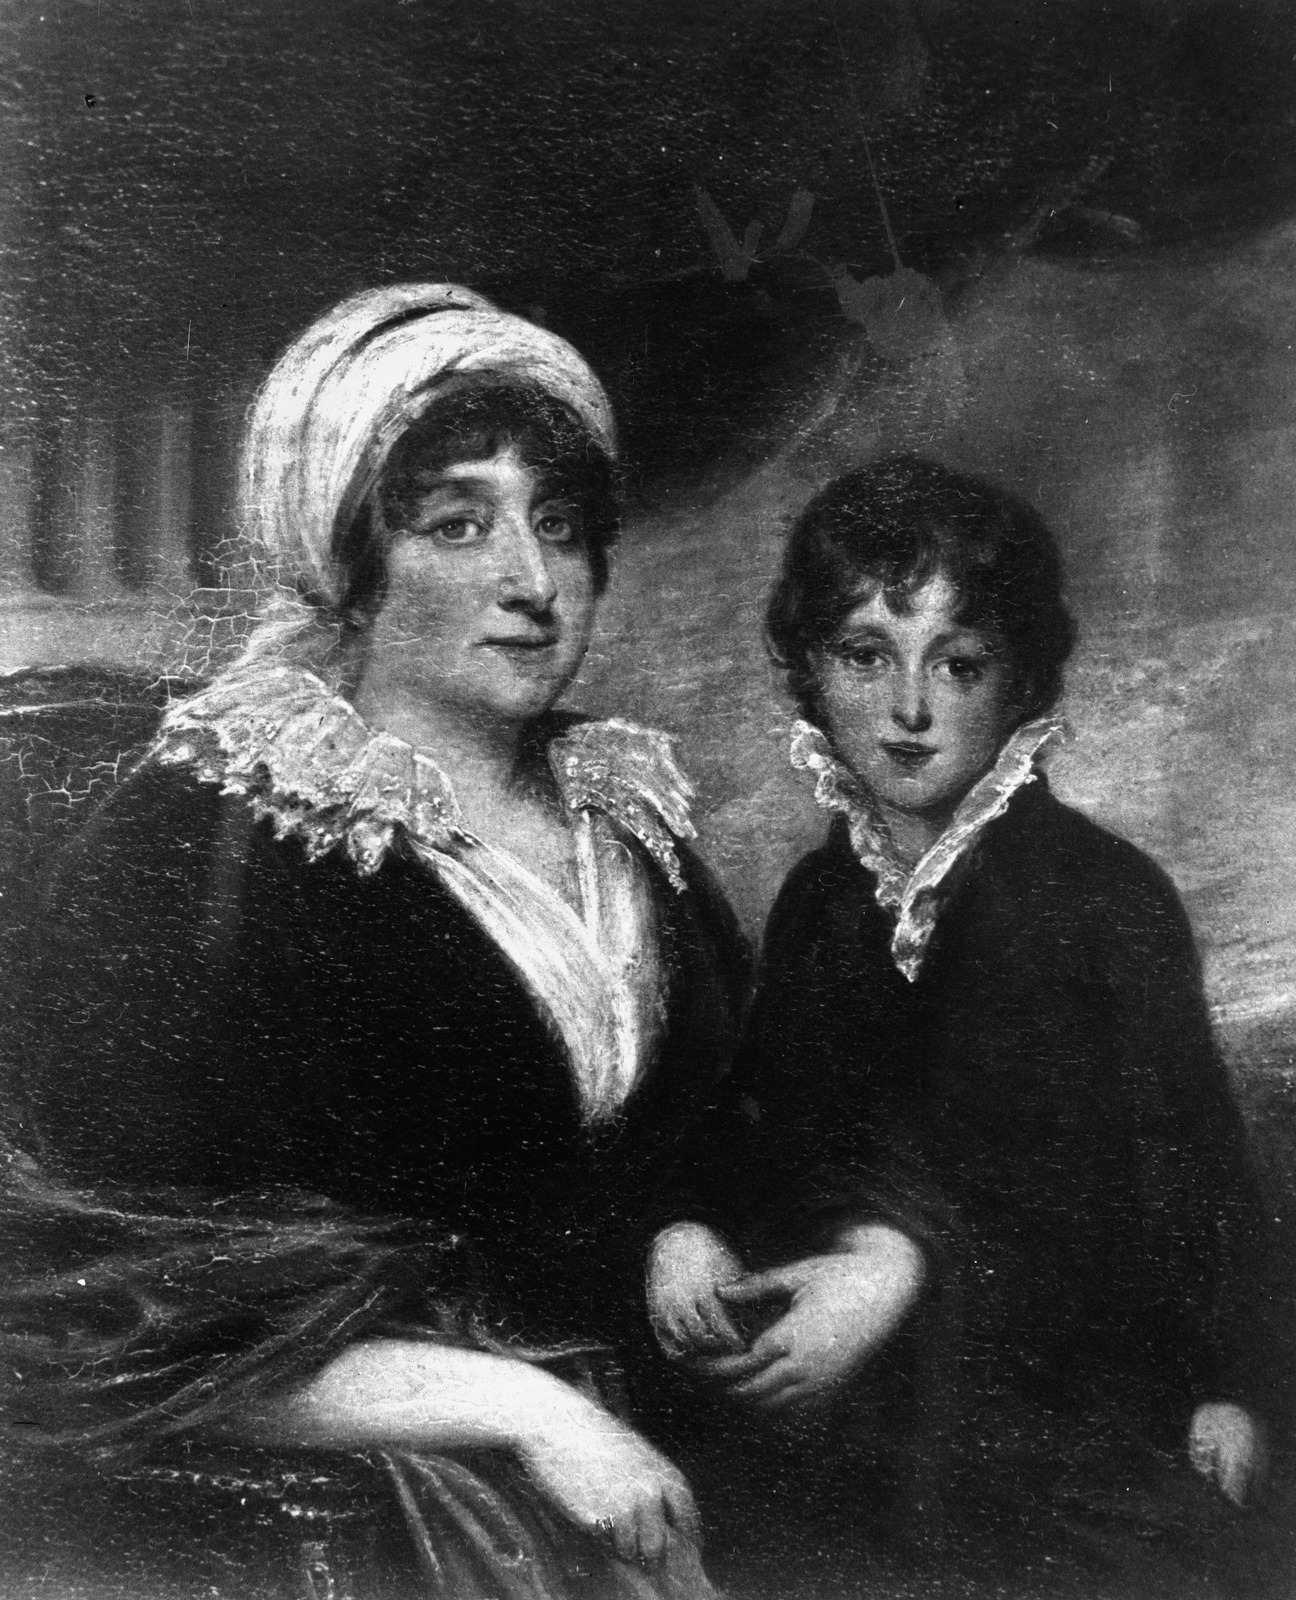  Lady Elizabeth Alicia (nee Wyndham) with her son Algernon Herbert, John Oxley Library, State Library of Queensland Neg: 60650 